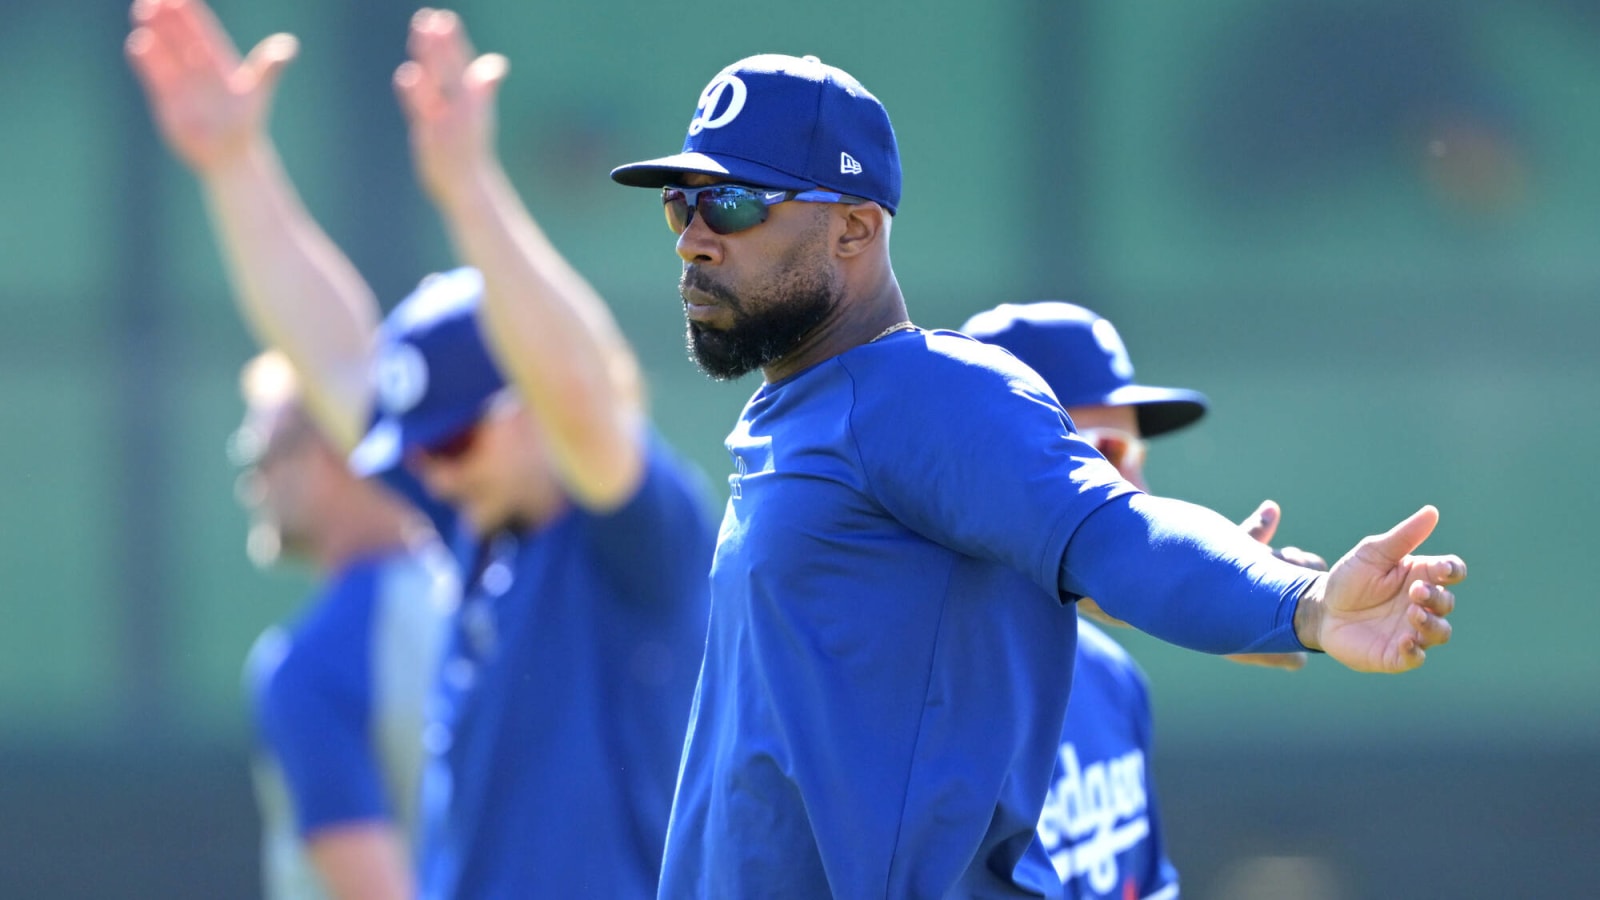 Jason Heyward Not Taking Return To Dodgers ‘For Granted’